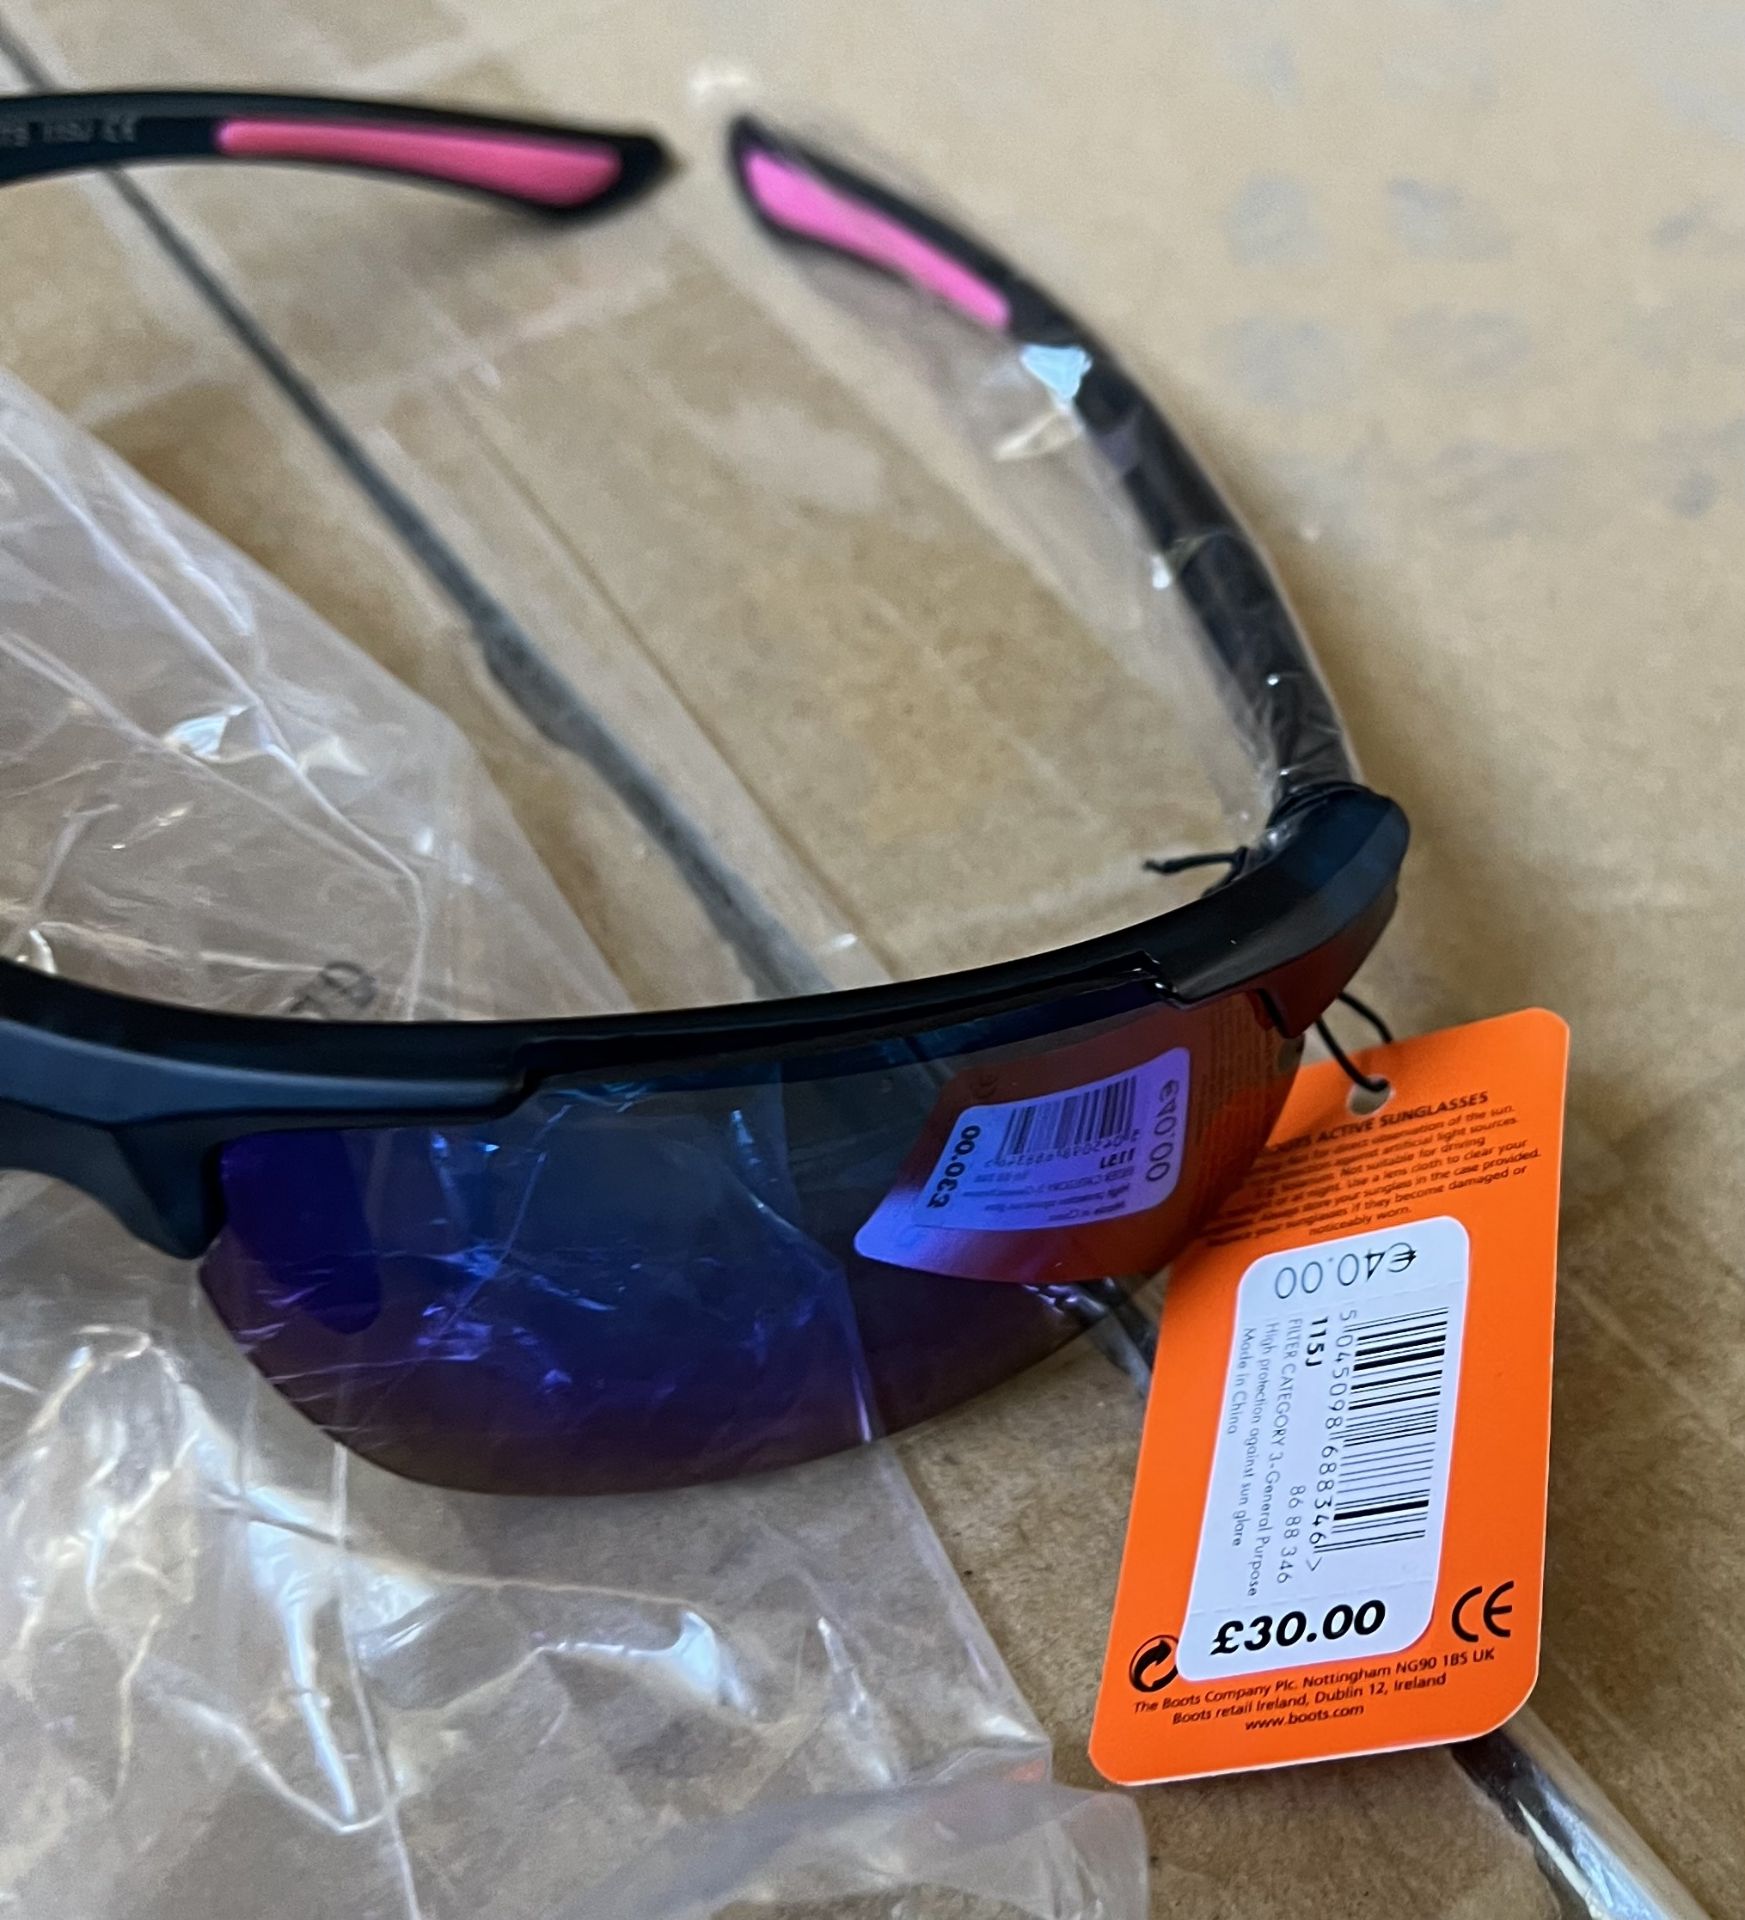 20 x Boots Active Sports Styled Sunglasses 100% UVA - (NEW) - BOOTS RRP Â£500 ! - Image 2 of 3